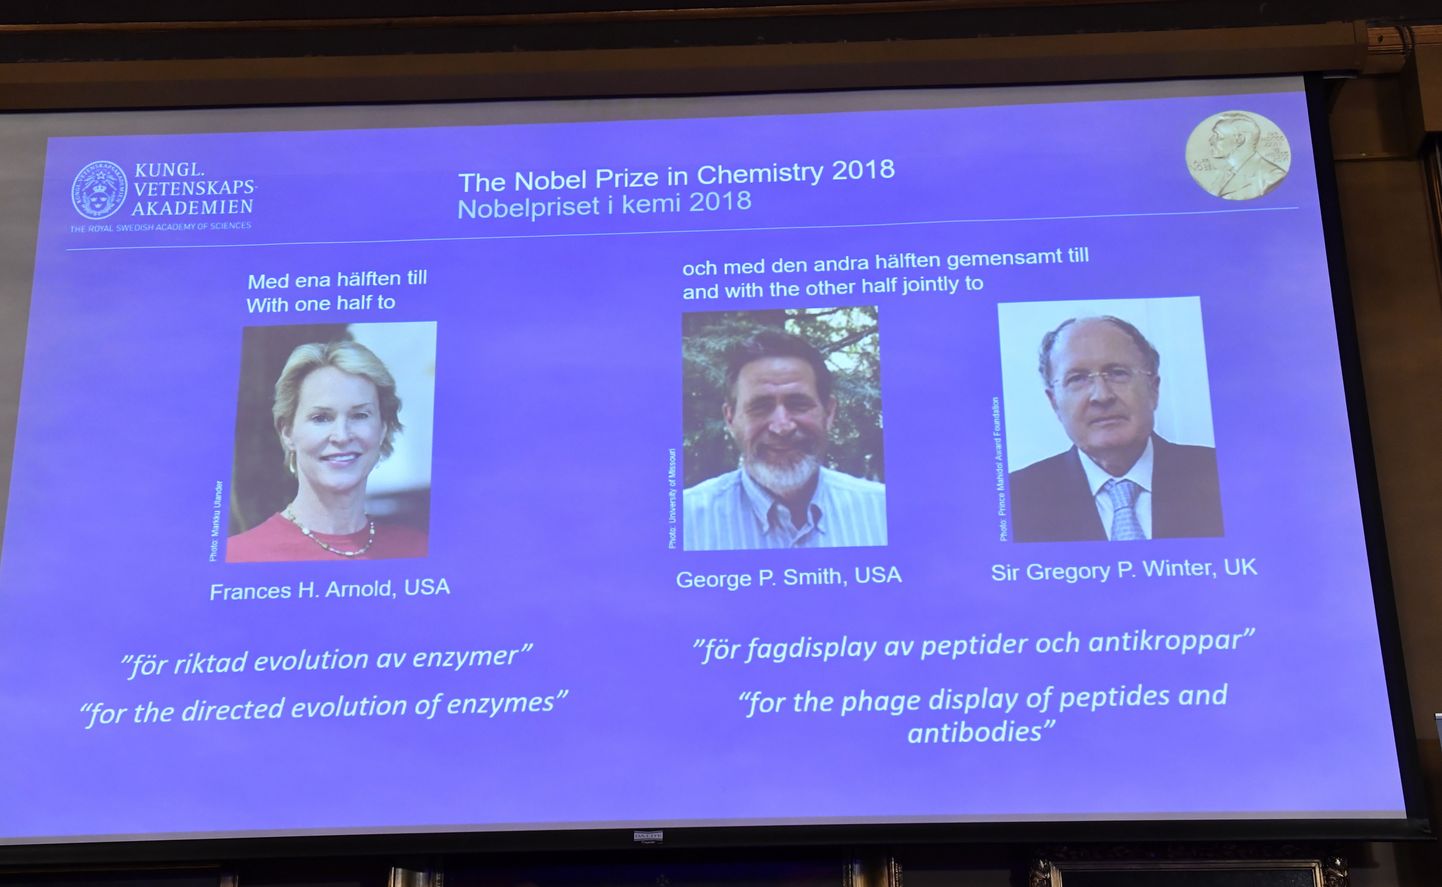 The Nobel Prize laureates for Chemistry 2018 (L-R) Frances H. Arnold, George P. Smith, and Gregory P Winter of Great Britain are displayed on a screen during the announcement at the Royal Swedish Academy of Sciences in Stockholm, Sweden, 03 October 2018.  EPA/Jonas Ekstromer  SWEDEN OUT SWEDEN OUT